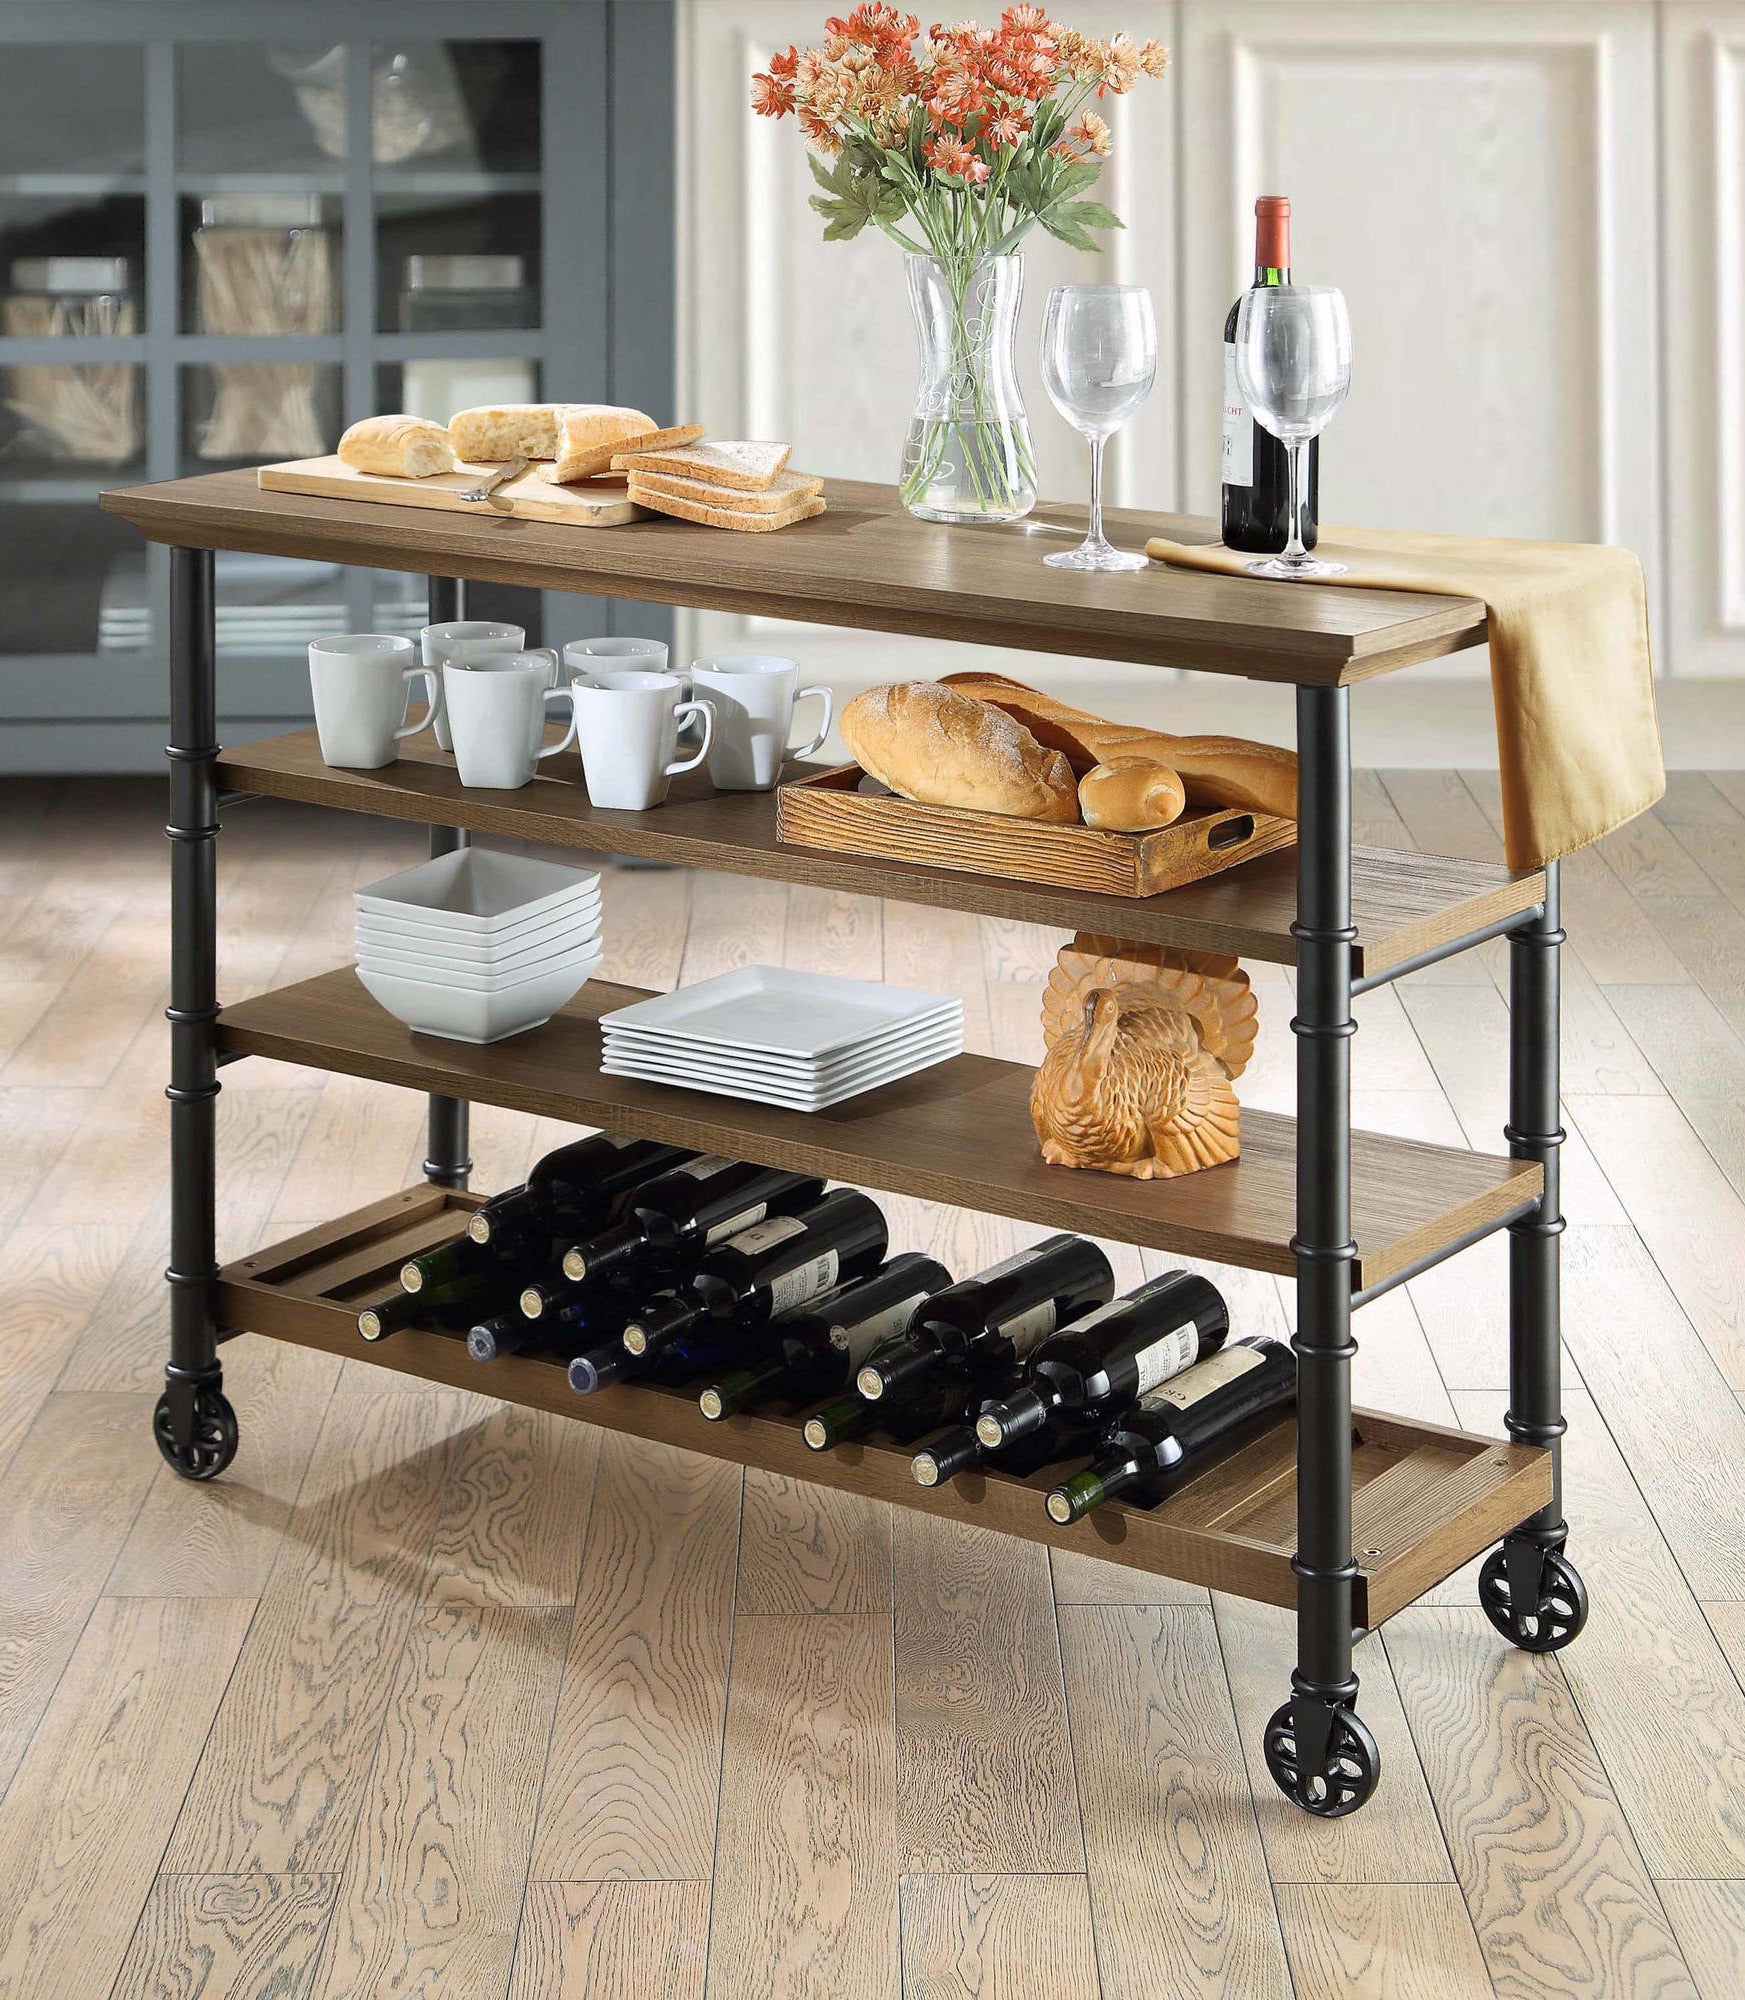 the wheeled cart with wine and dishes